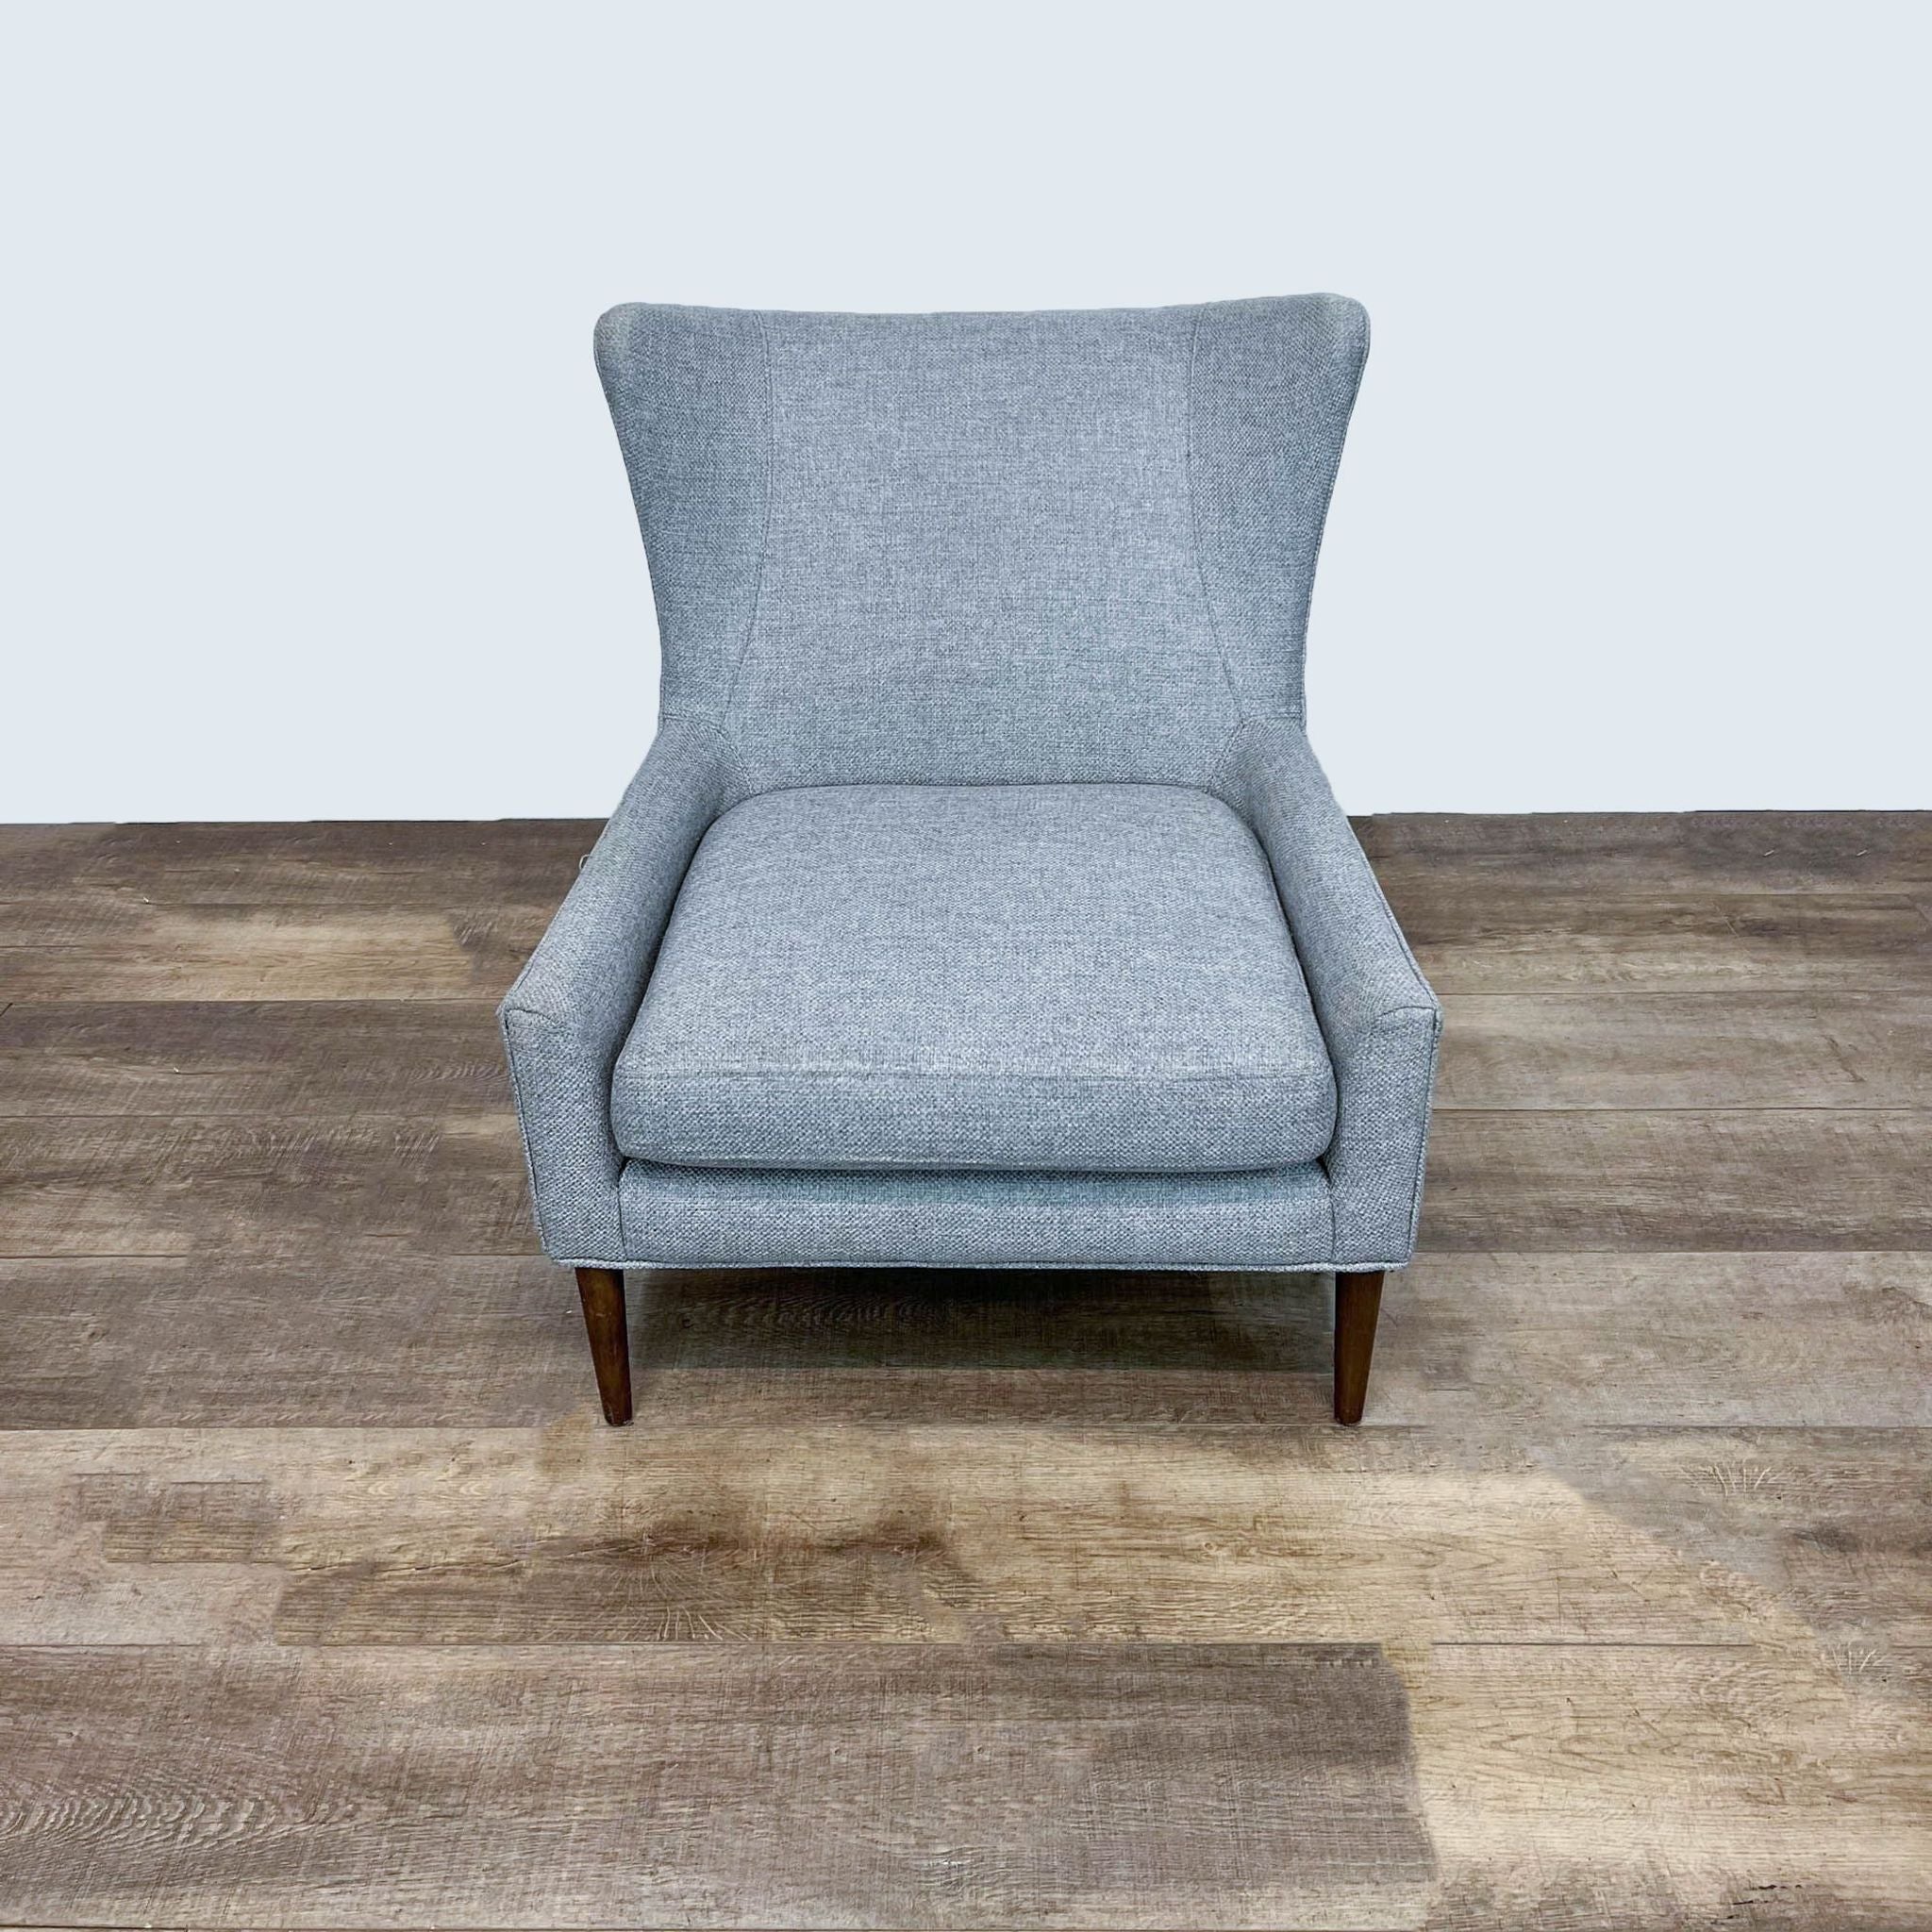 Modern Marlow chair by Four Hands, front view, showcasing sleek lines with gray fabric and tapered wooden legs.